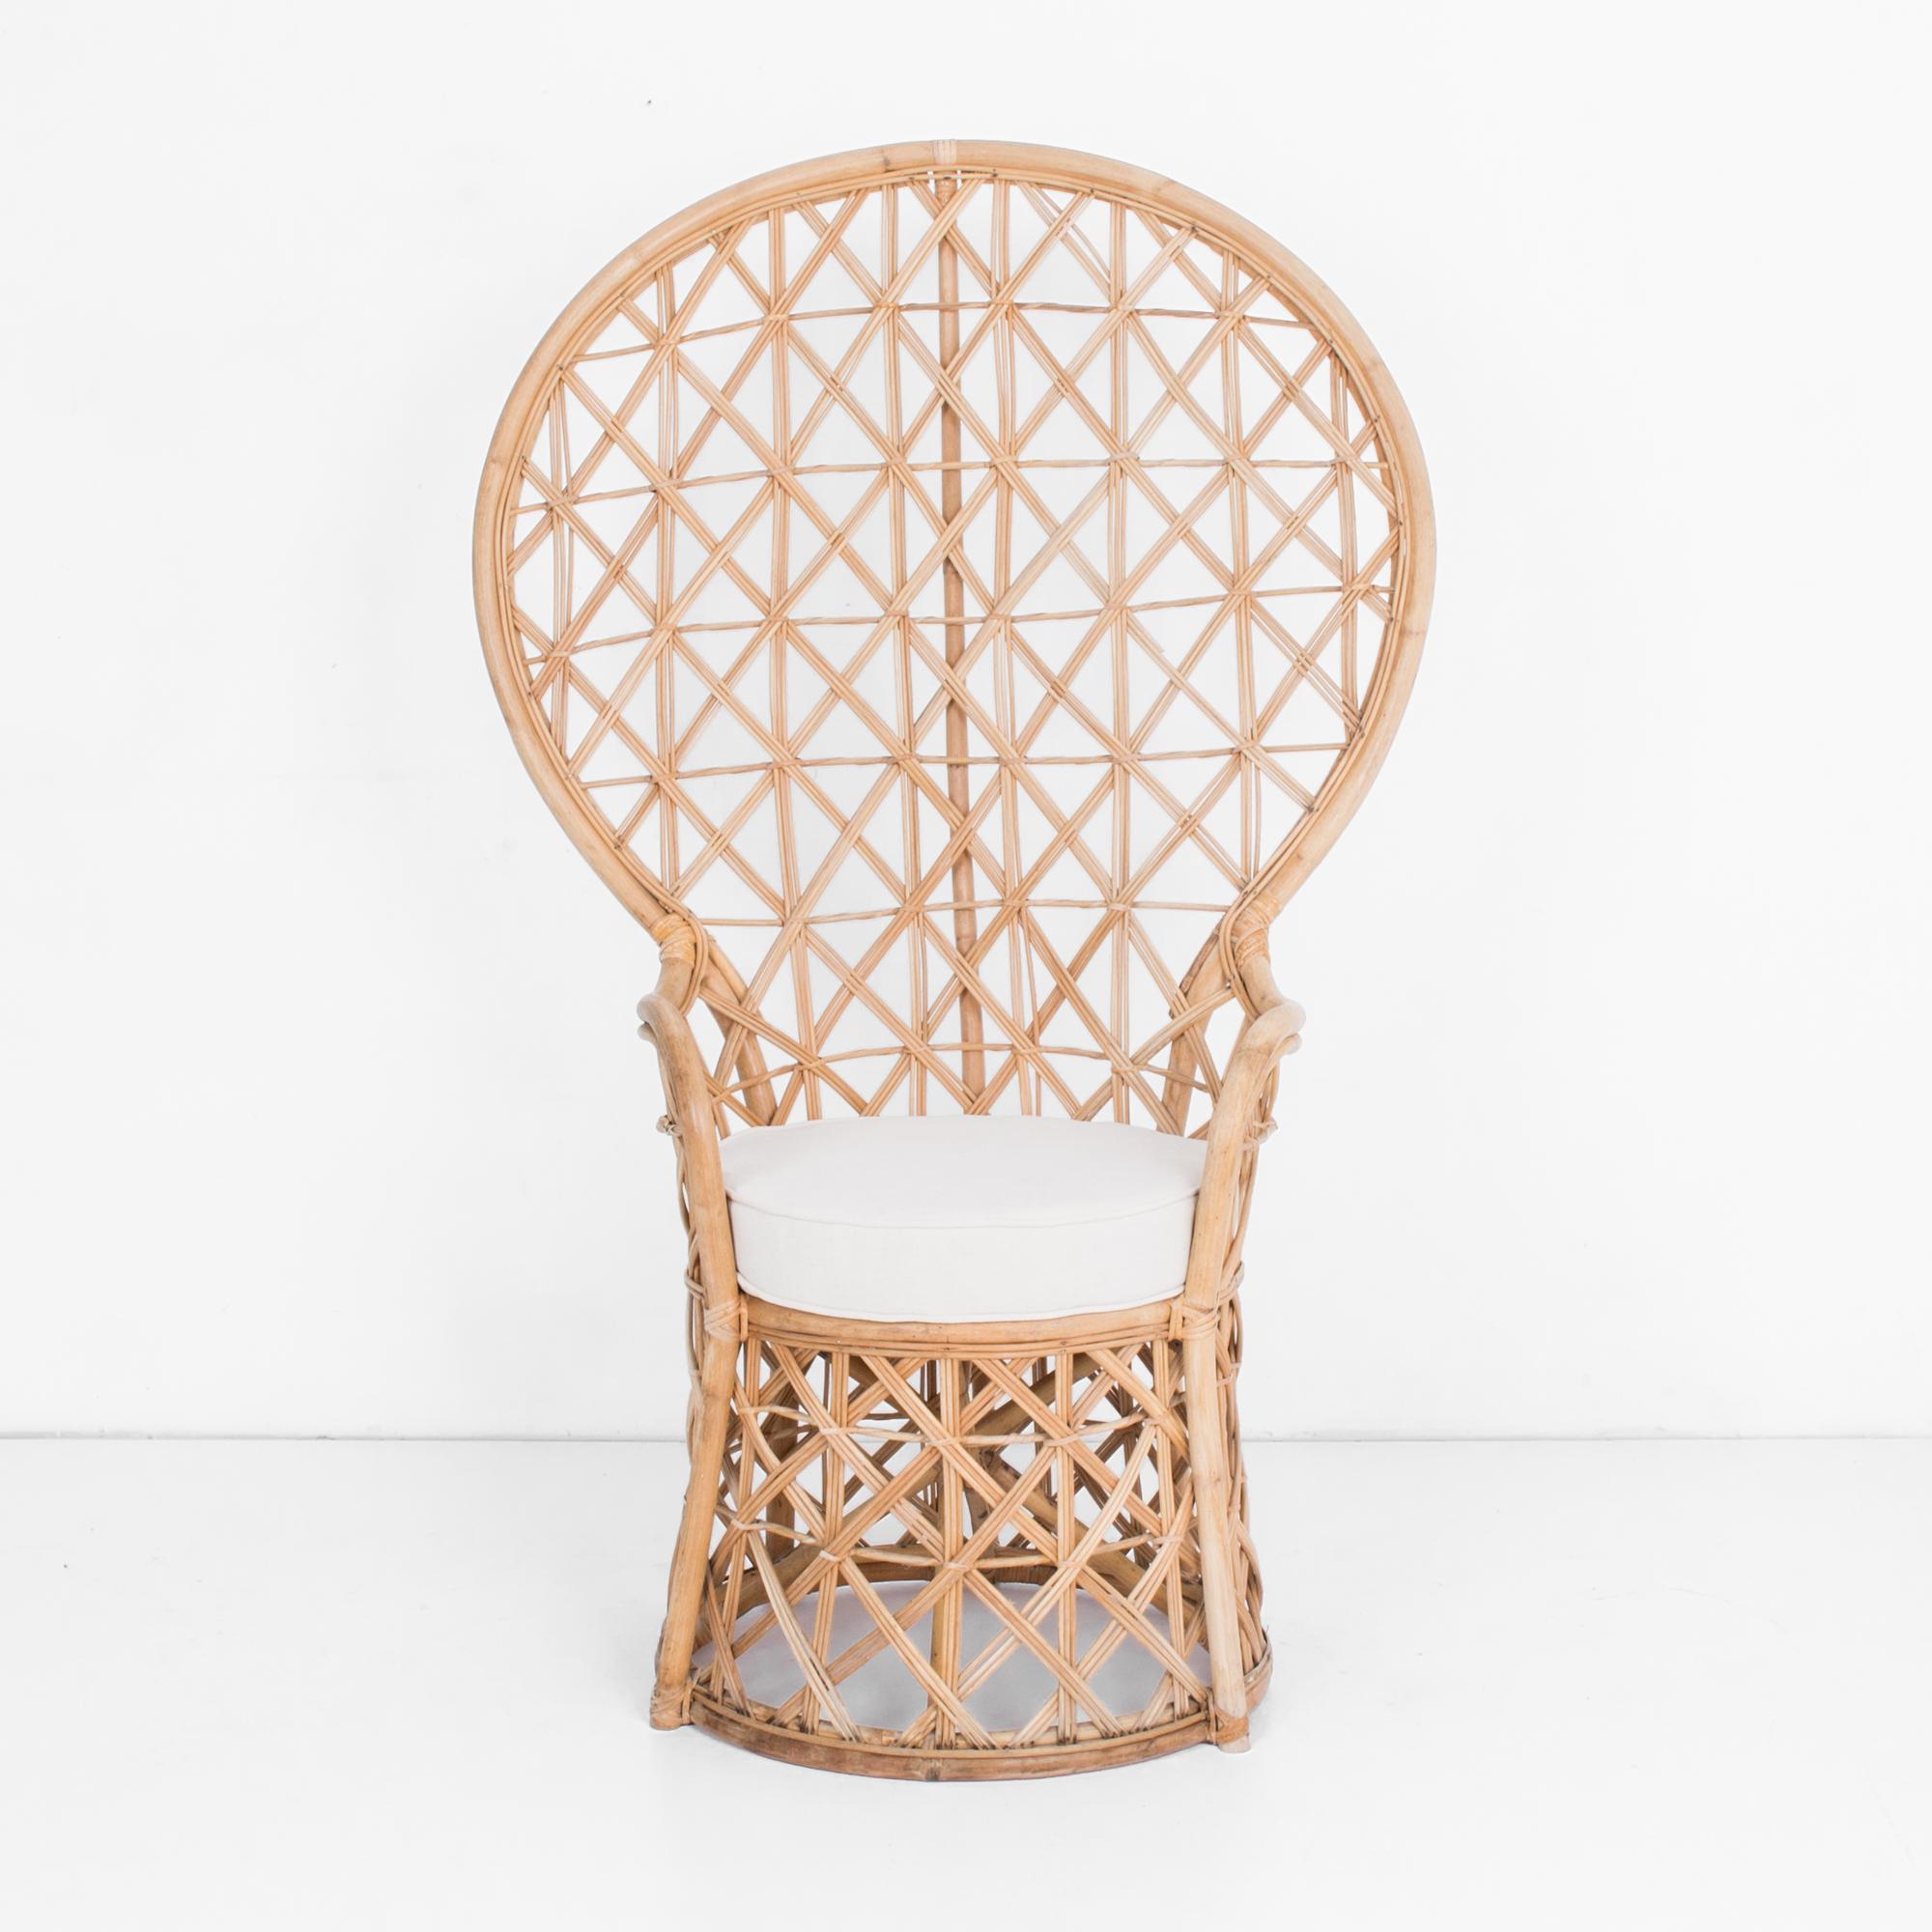 In typical mid-20th century rattan fashion, an “Emmanuelle” style armchair from circa 1950. This throne like chair has a great shape, with a thickly braided intriguing and supportive woven rattan back. Topped with a re-upholstered cotton-linen